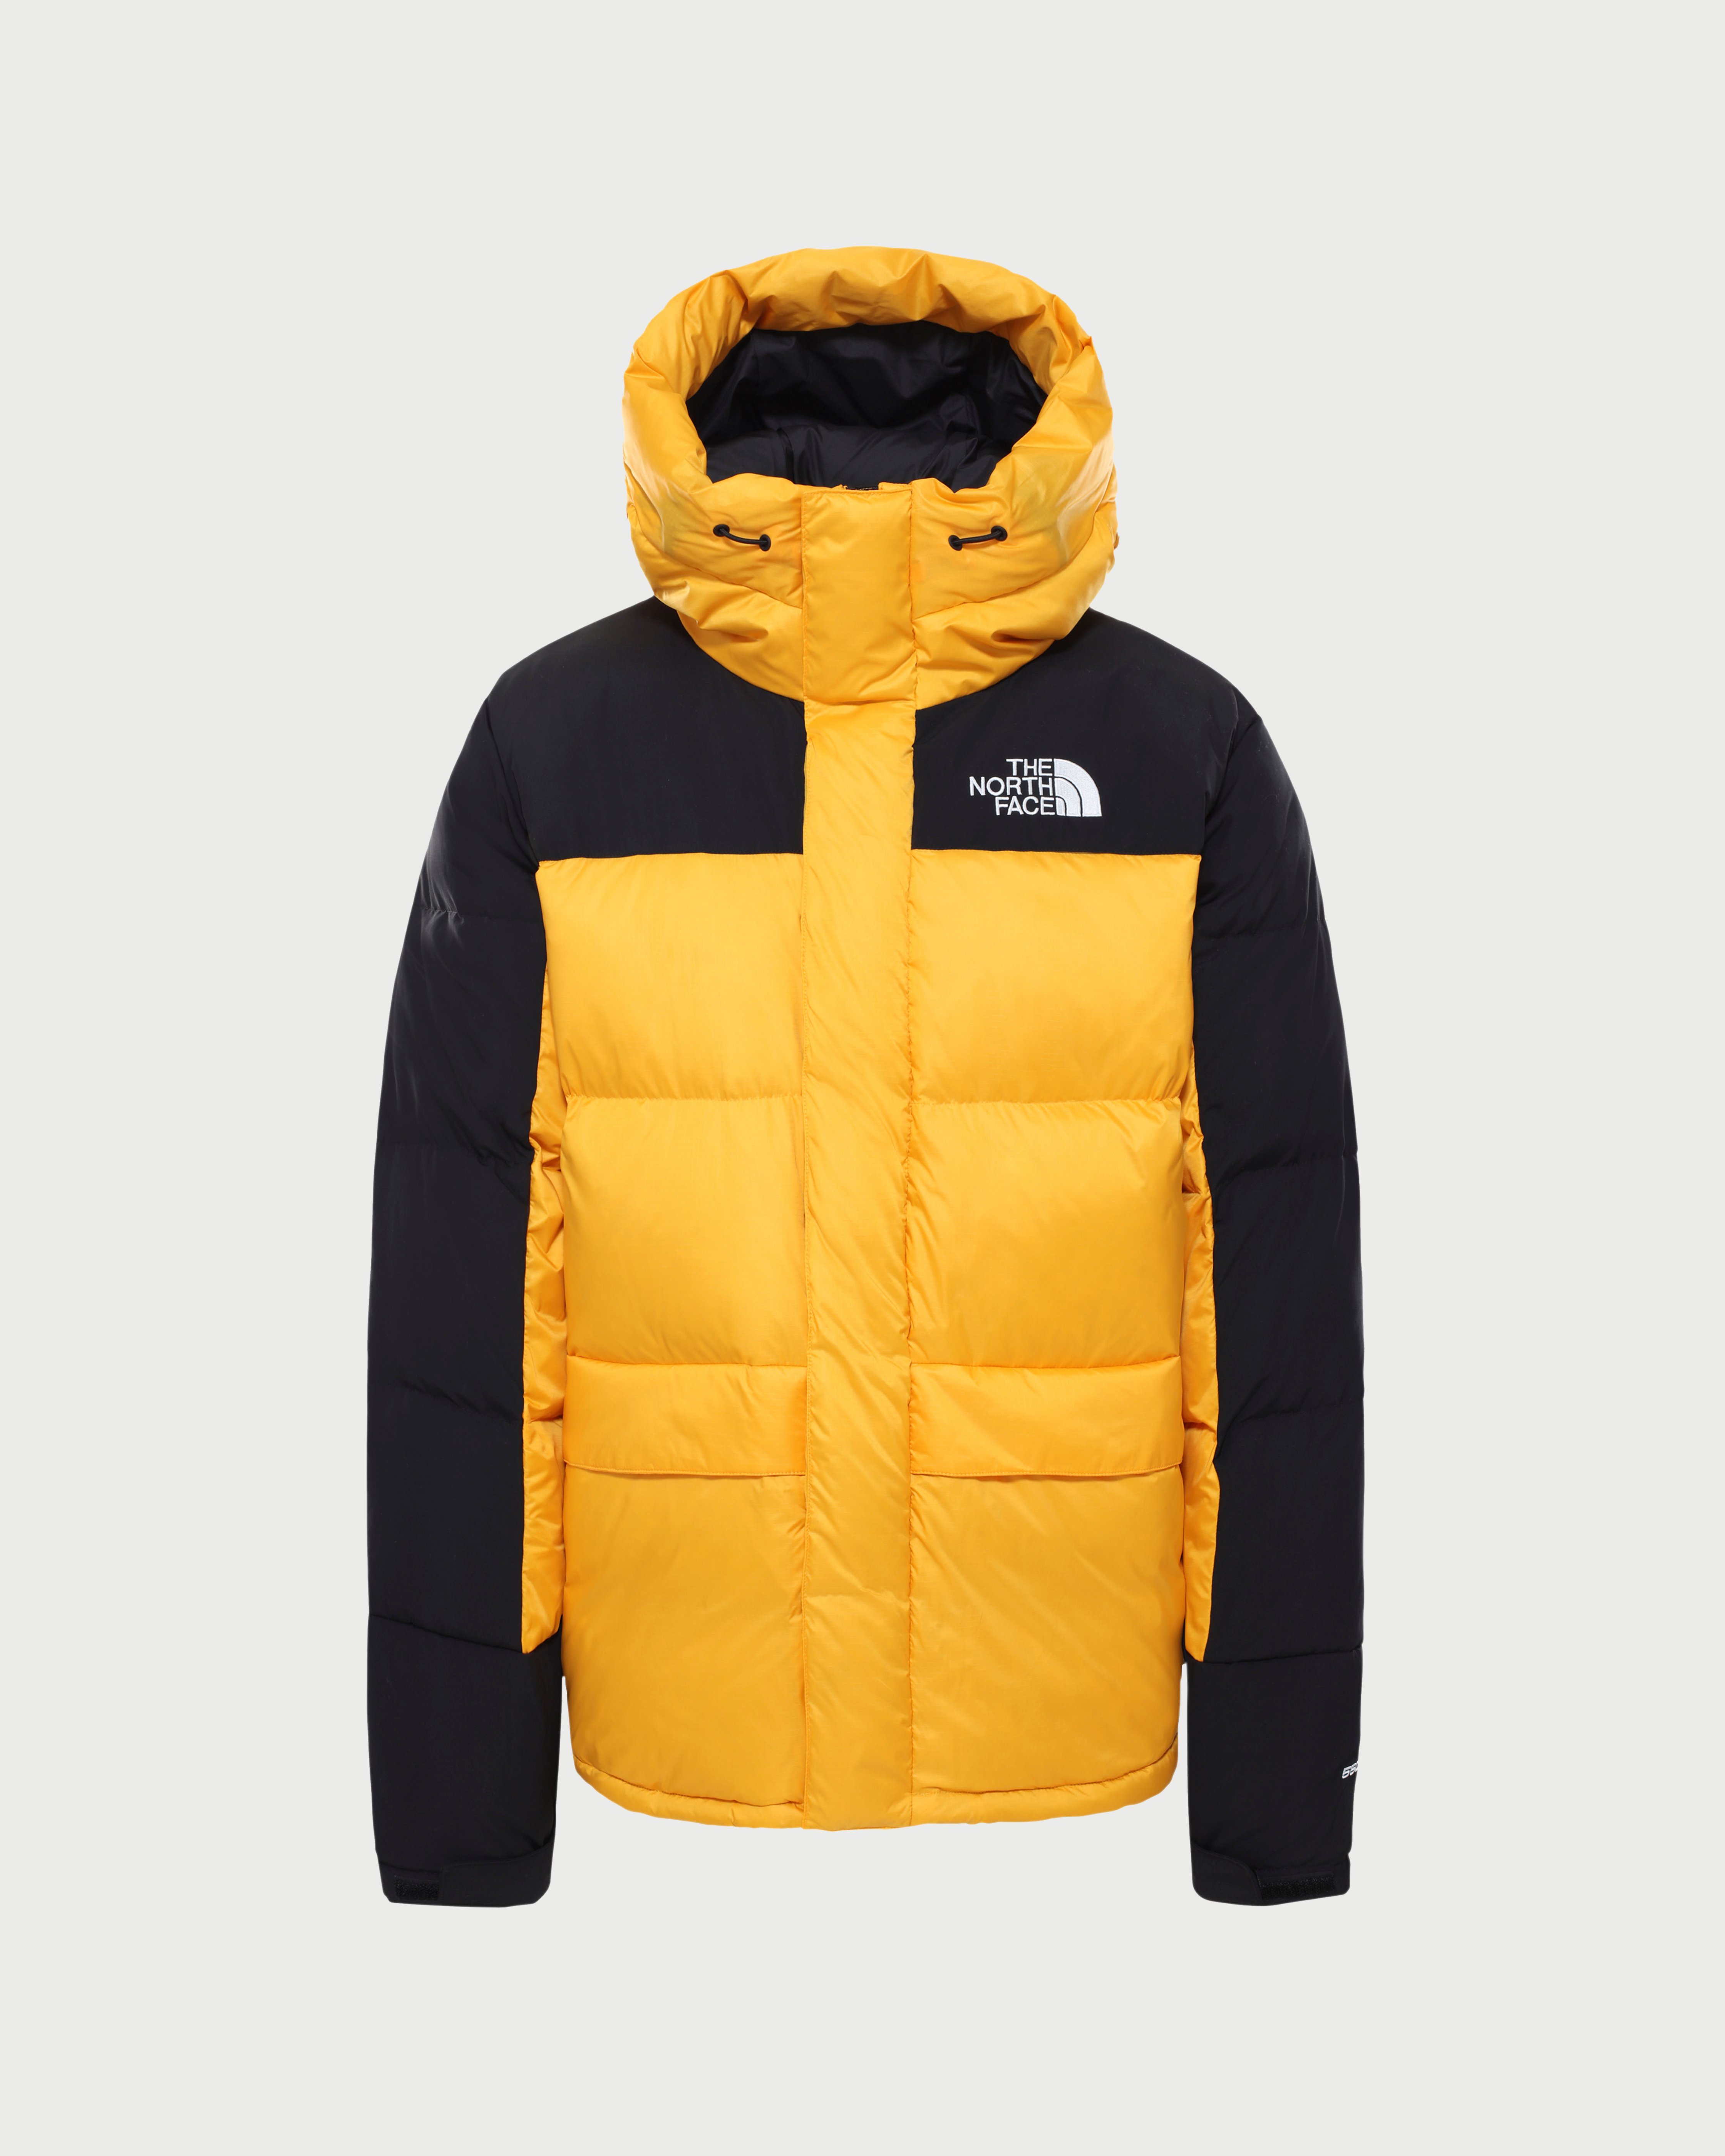 The North Face - Himalayan Down Jacket Peak Summit Gold Unisex - Clothing - Yellow - Image 1